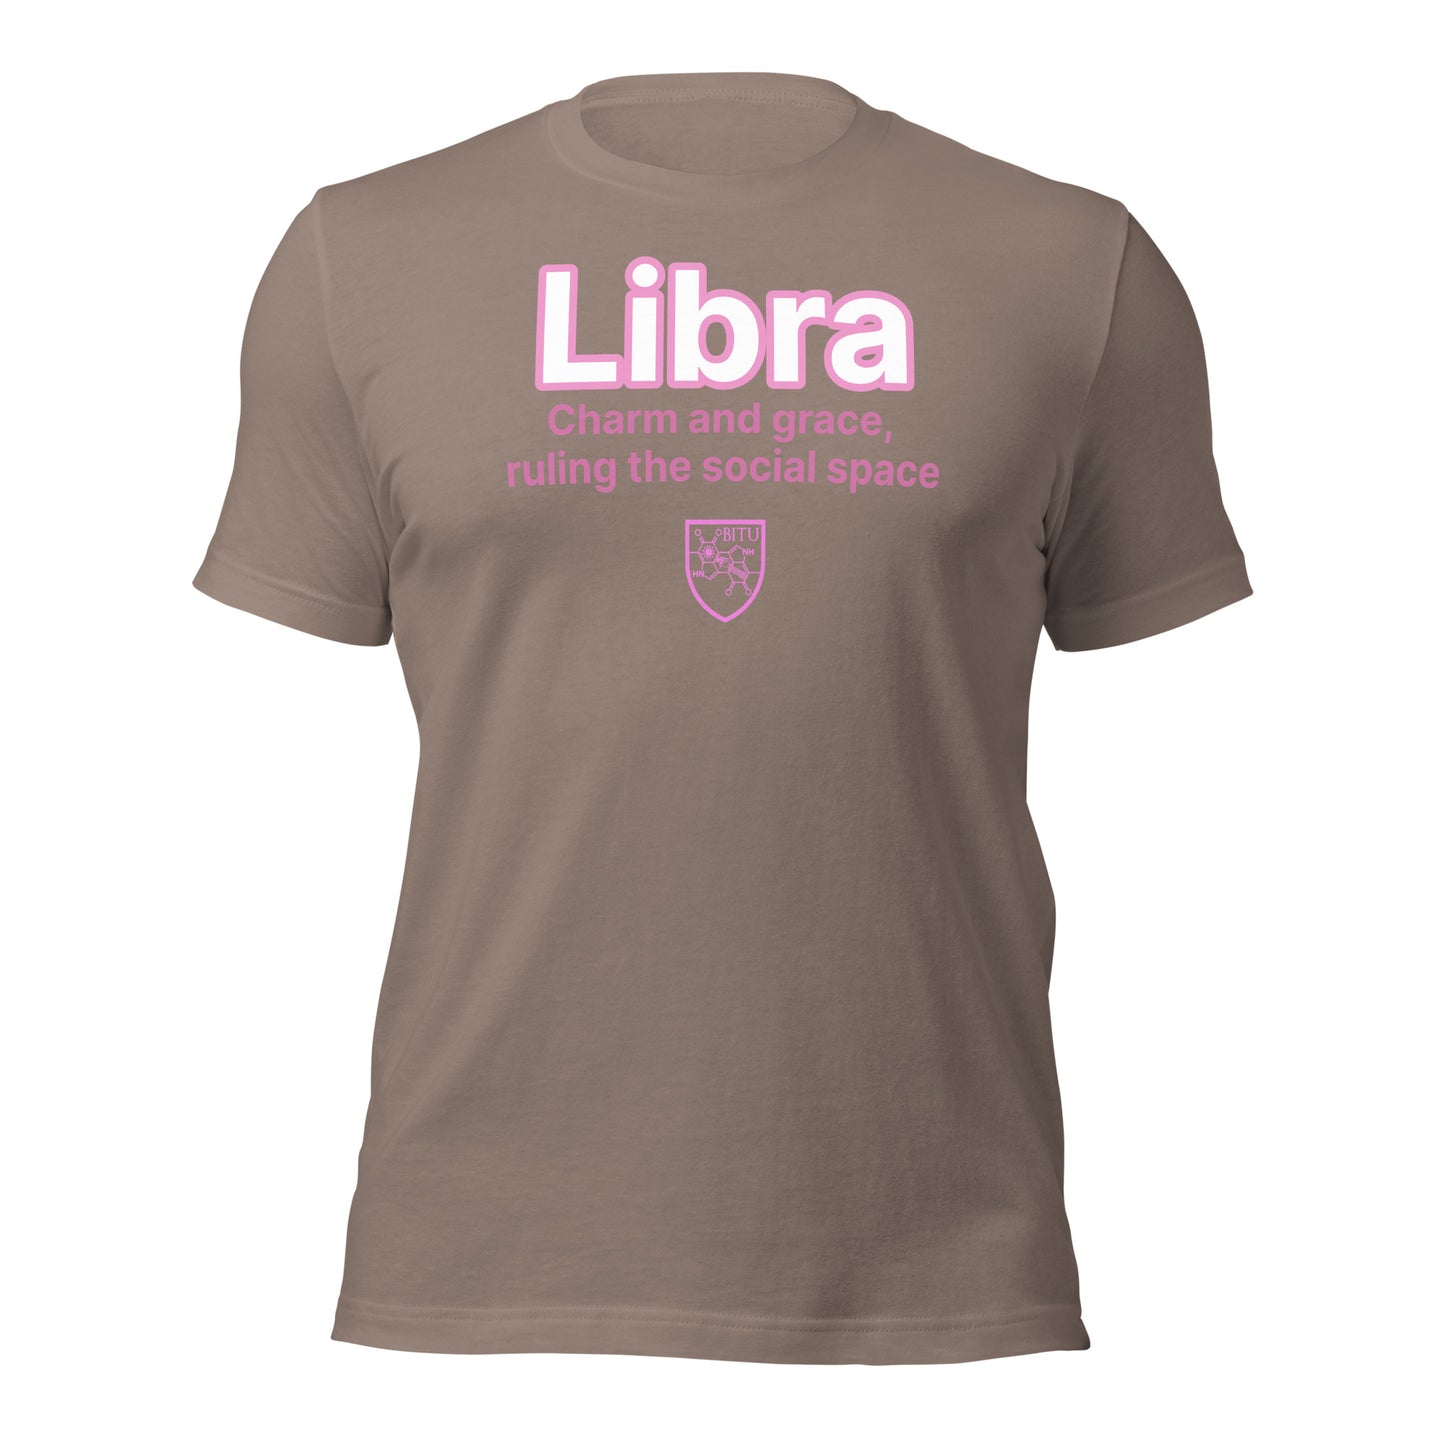 Libra - Charm and grace, ruling the social space